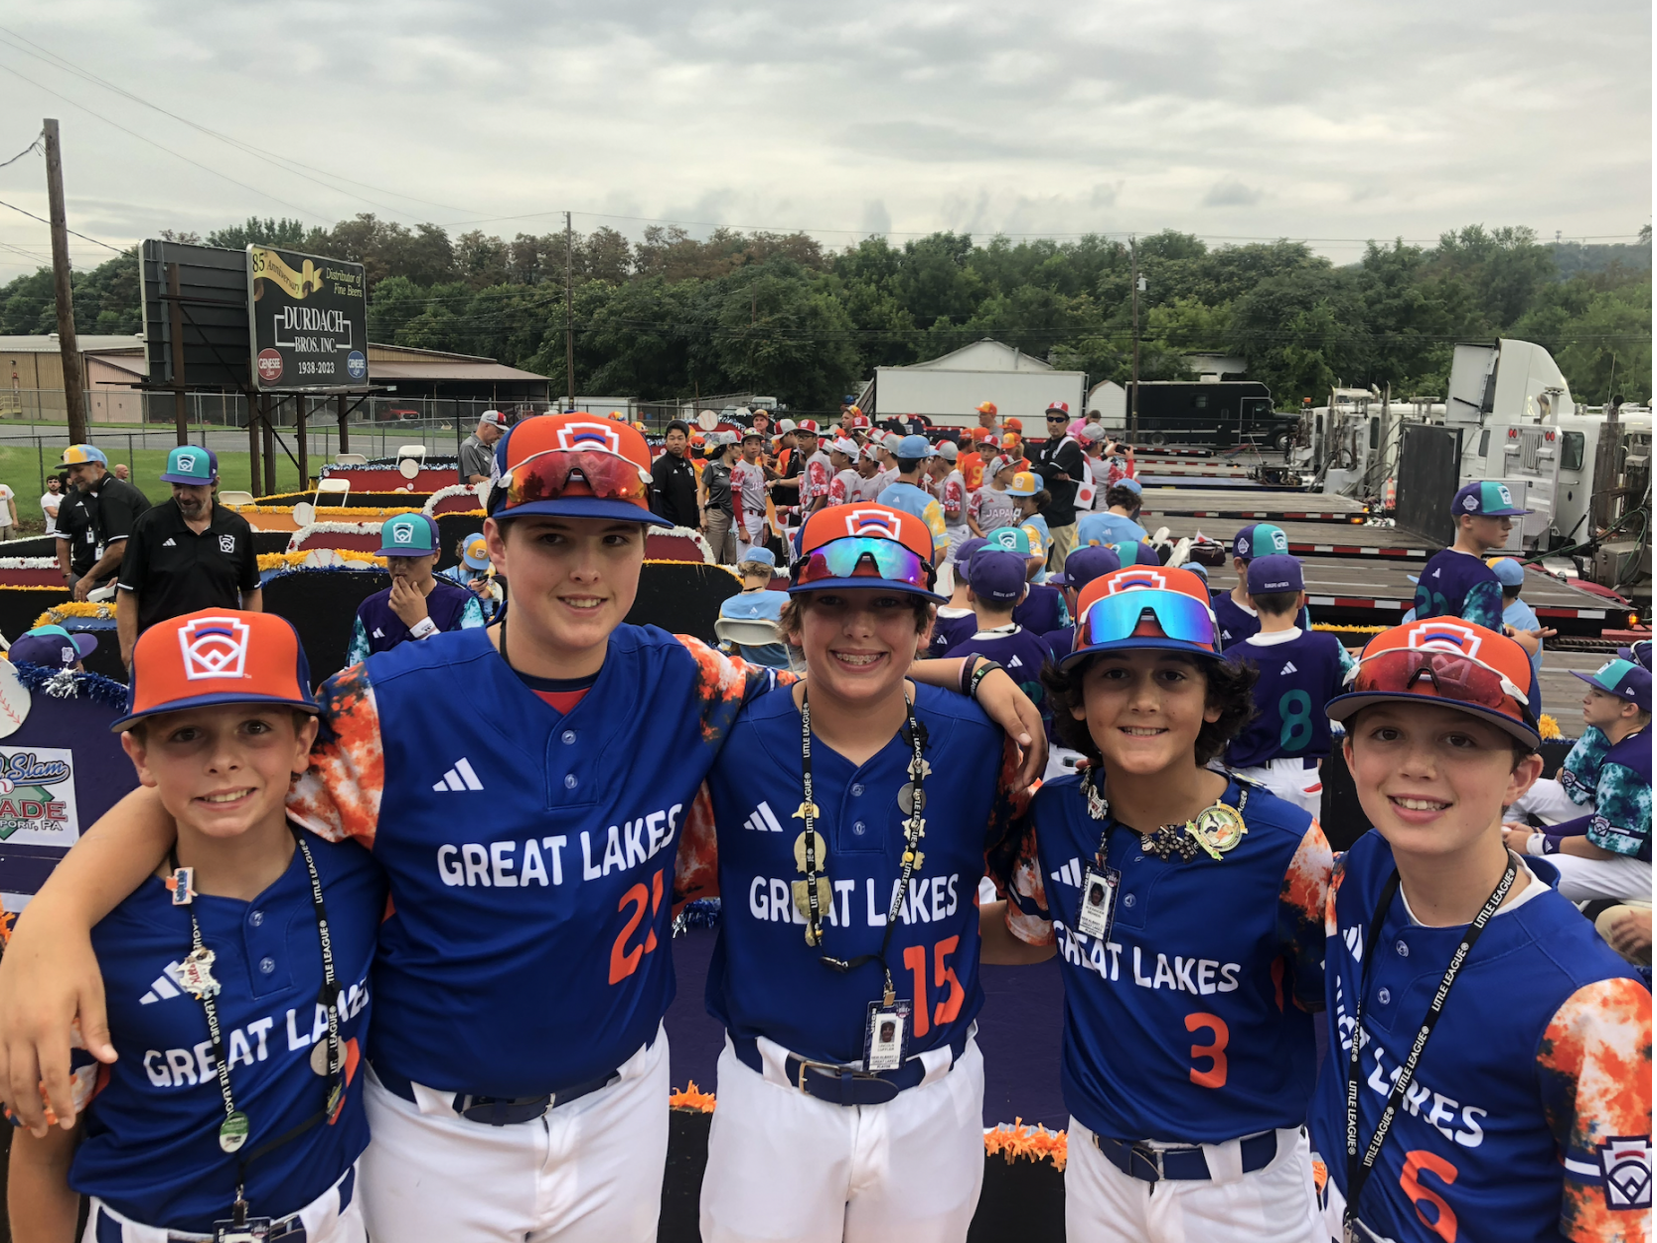 New Albany loses 4-3 in rain-shortened game at Little League World Series, Local News